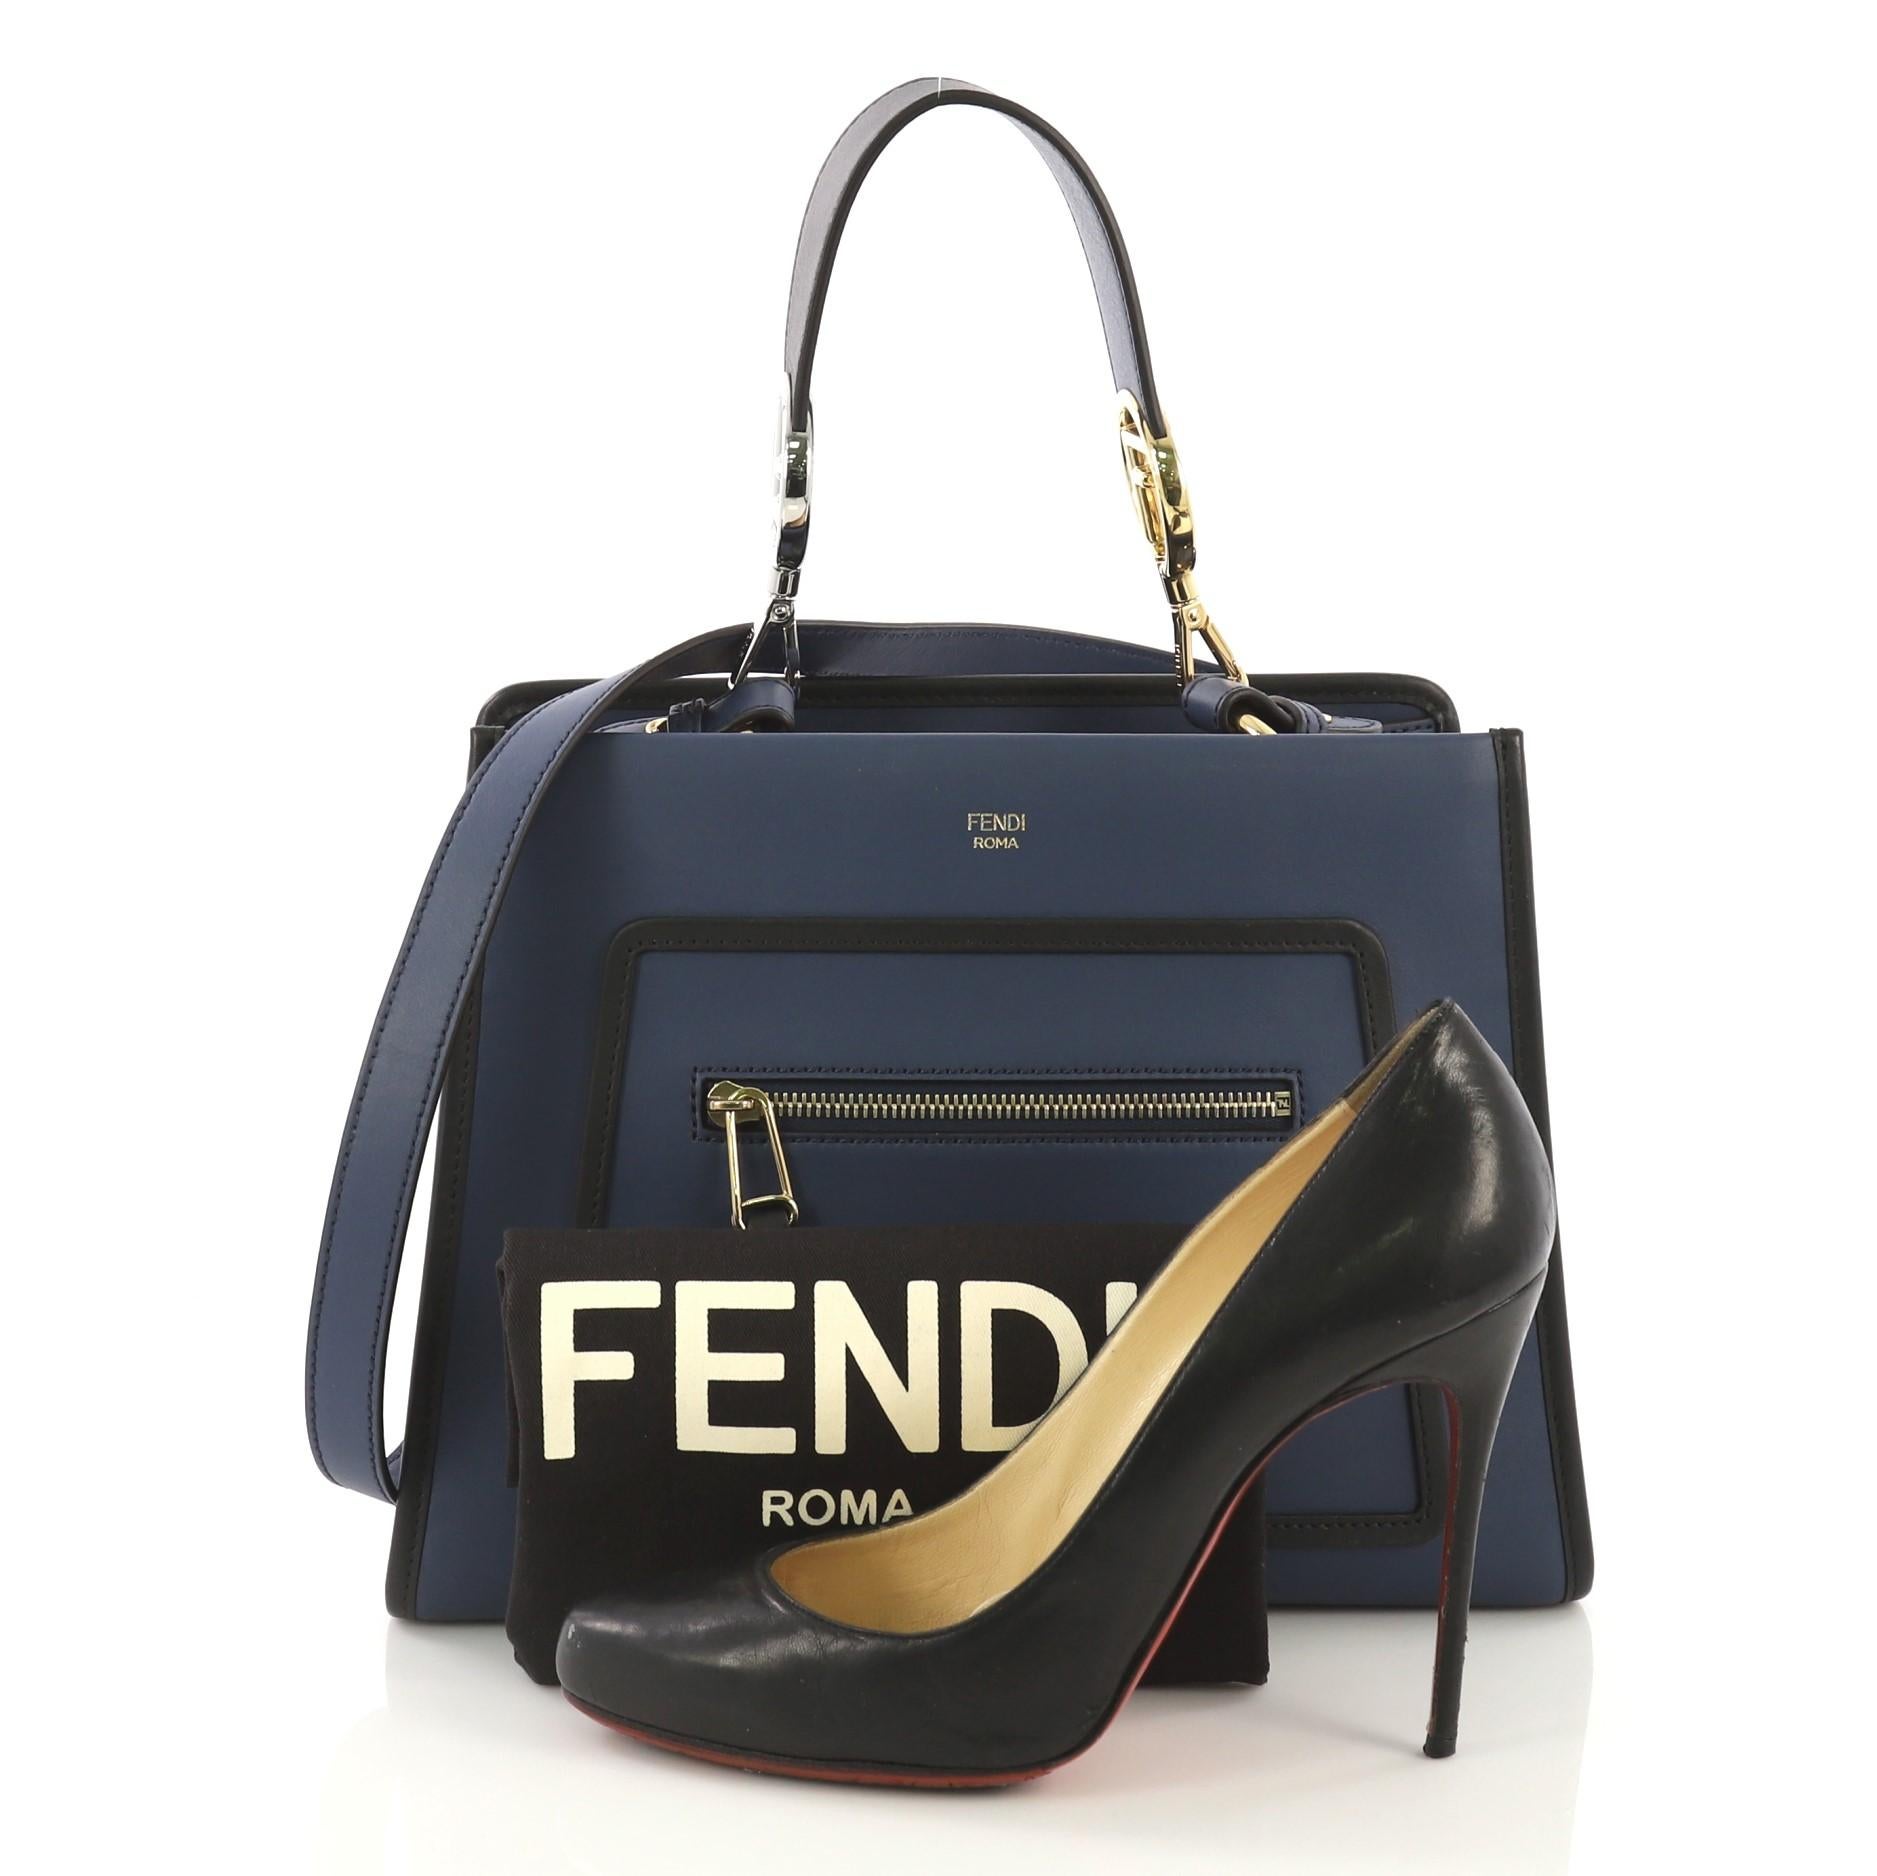 This Fendi Runaway Handbag Leather Small, crafted from navy leather, features a flat leather handle, exterior zip pocket, and silver and gold-tone hardware. Its magnetic snap button closure opens to a taupe microfiber interior with zip and slip